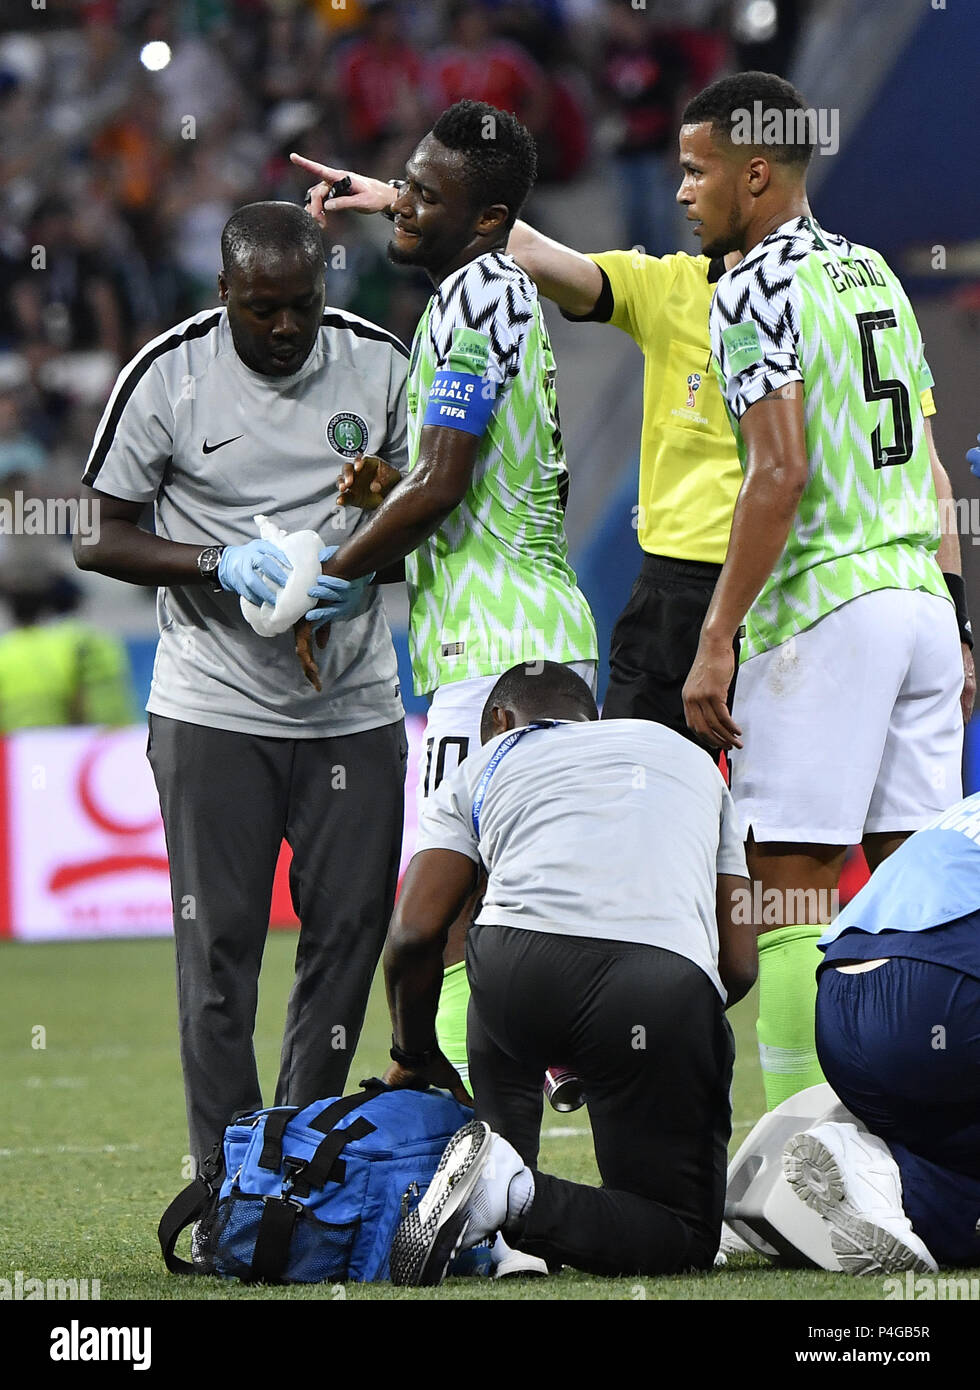 Volgograd, Russia. 22nd June, 2018. John Obi Mikel (C) of Nigeria receives medical treatment during the 2018 FIFA World Cup Group D match between Nigeria and Iceland in Volgograd, Russia, June 22, 2018. Nigeria won 2-0. Credit: He Canling/Xinhua/Alamy Live News Stock Photo